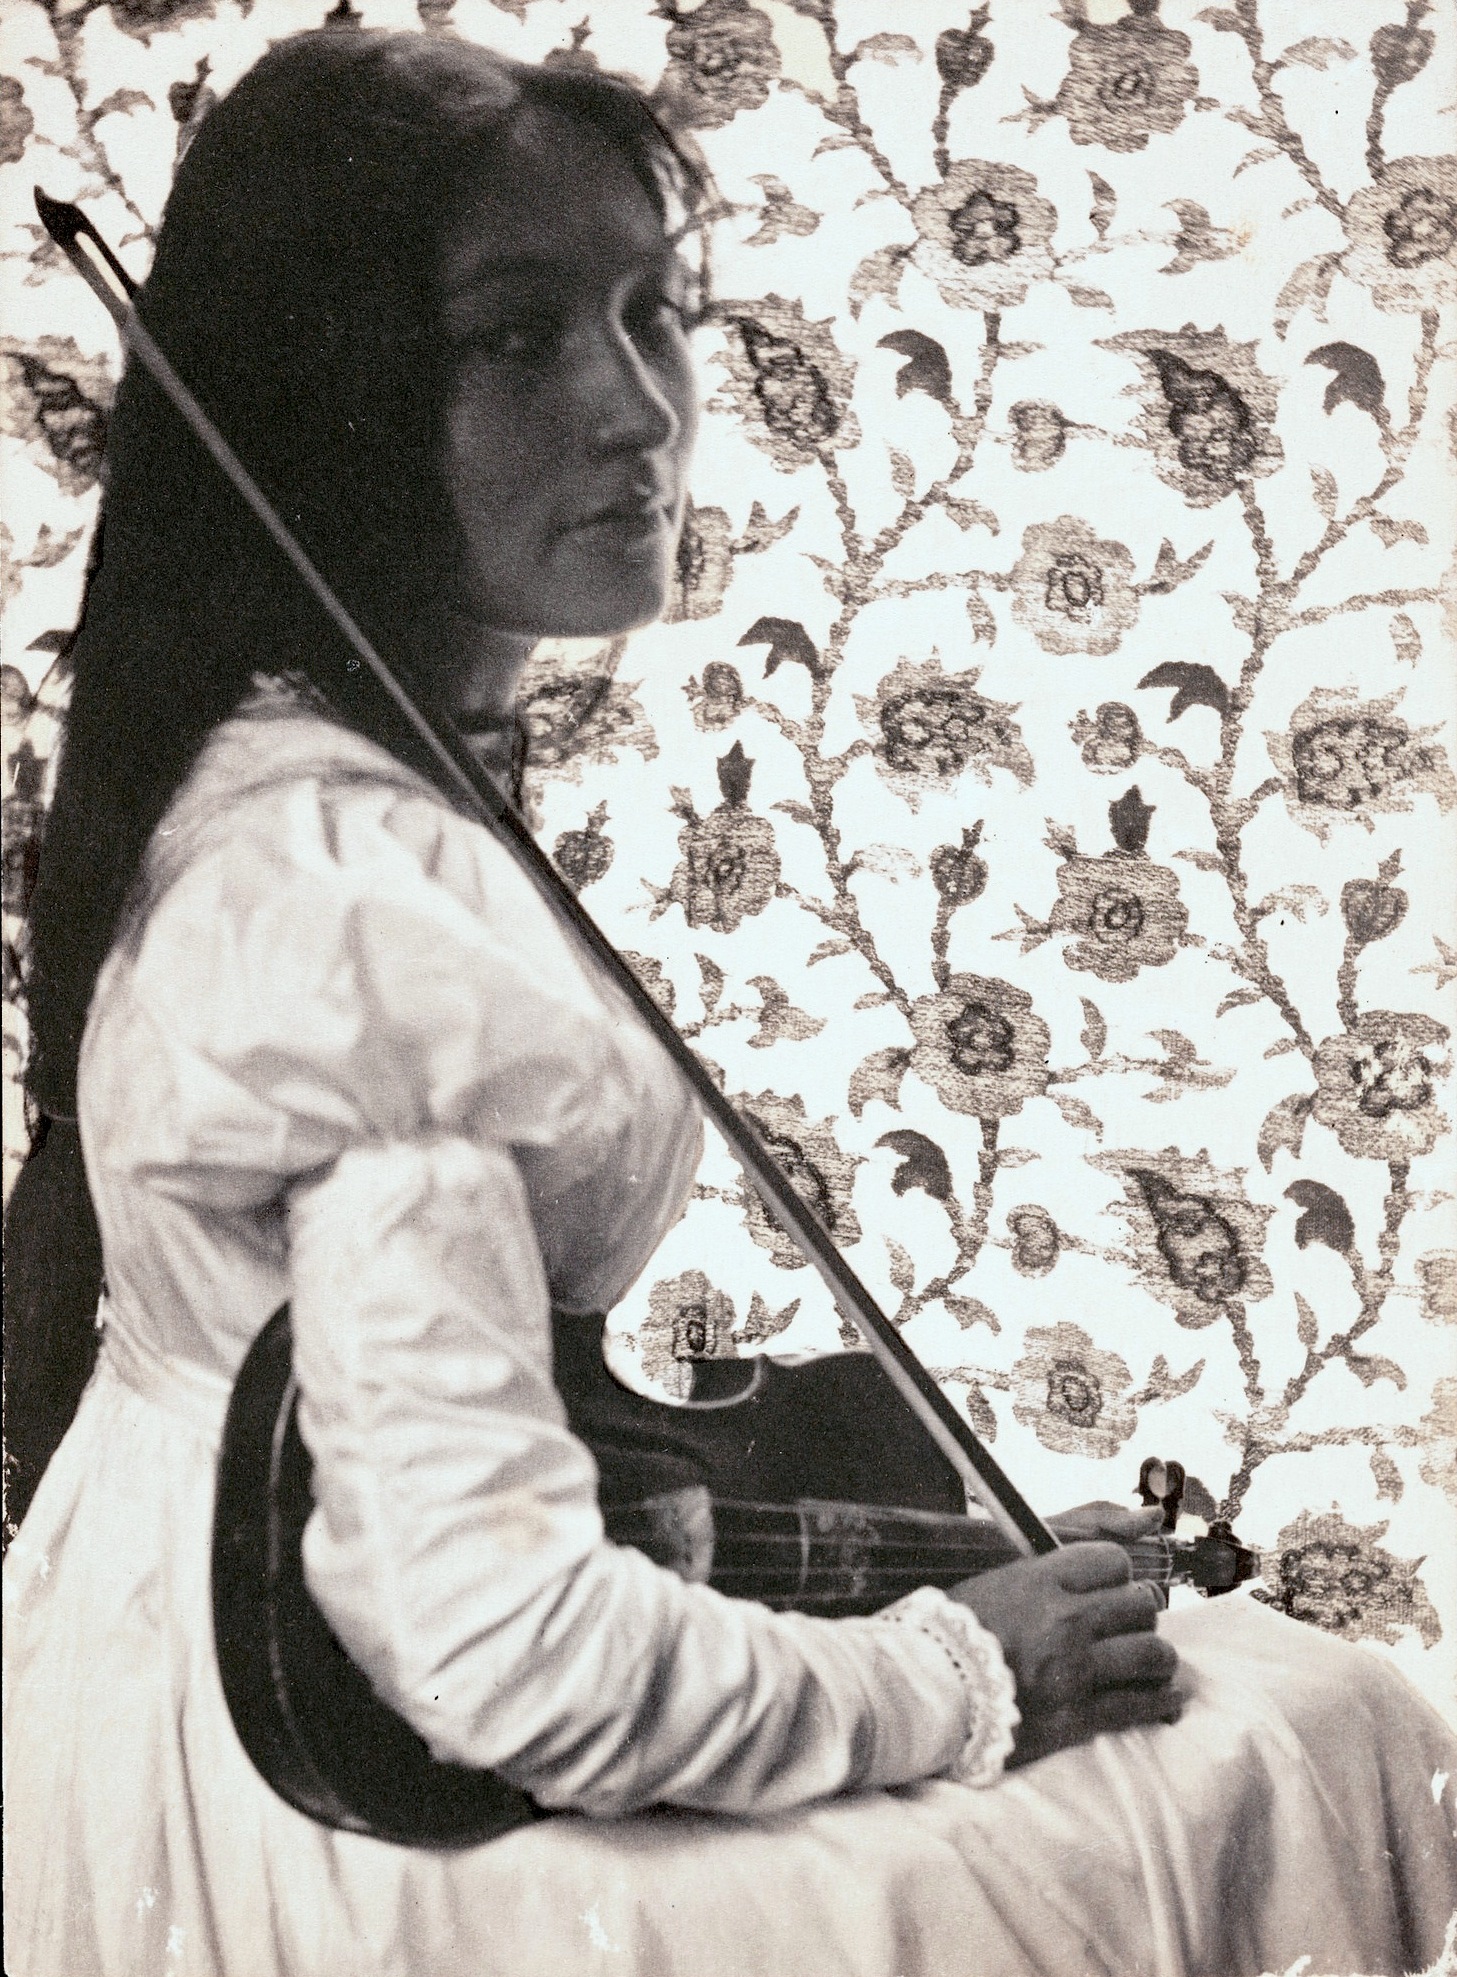 Portrait of Zitkala-Sa, wearing a white puff-sleeve dress, looking over her shoulder and holding her violin. The background is floral wallpaper.